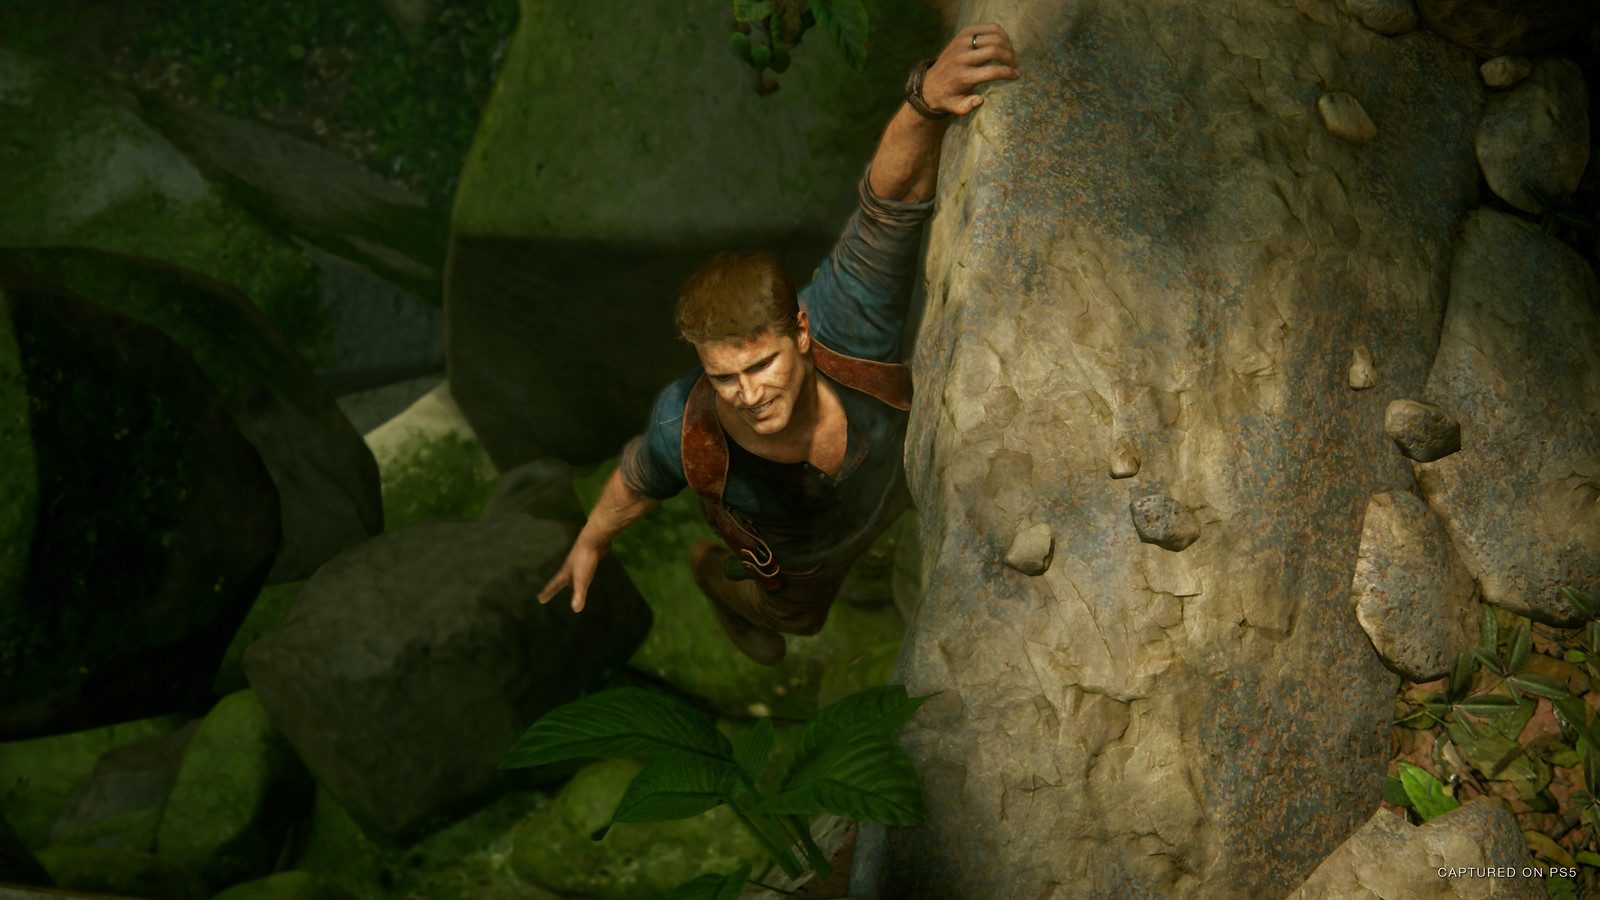 Playing Uncharted 4 again on the PS5 again is a fantastic experience